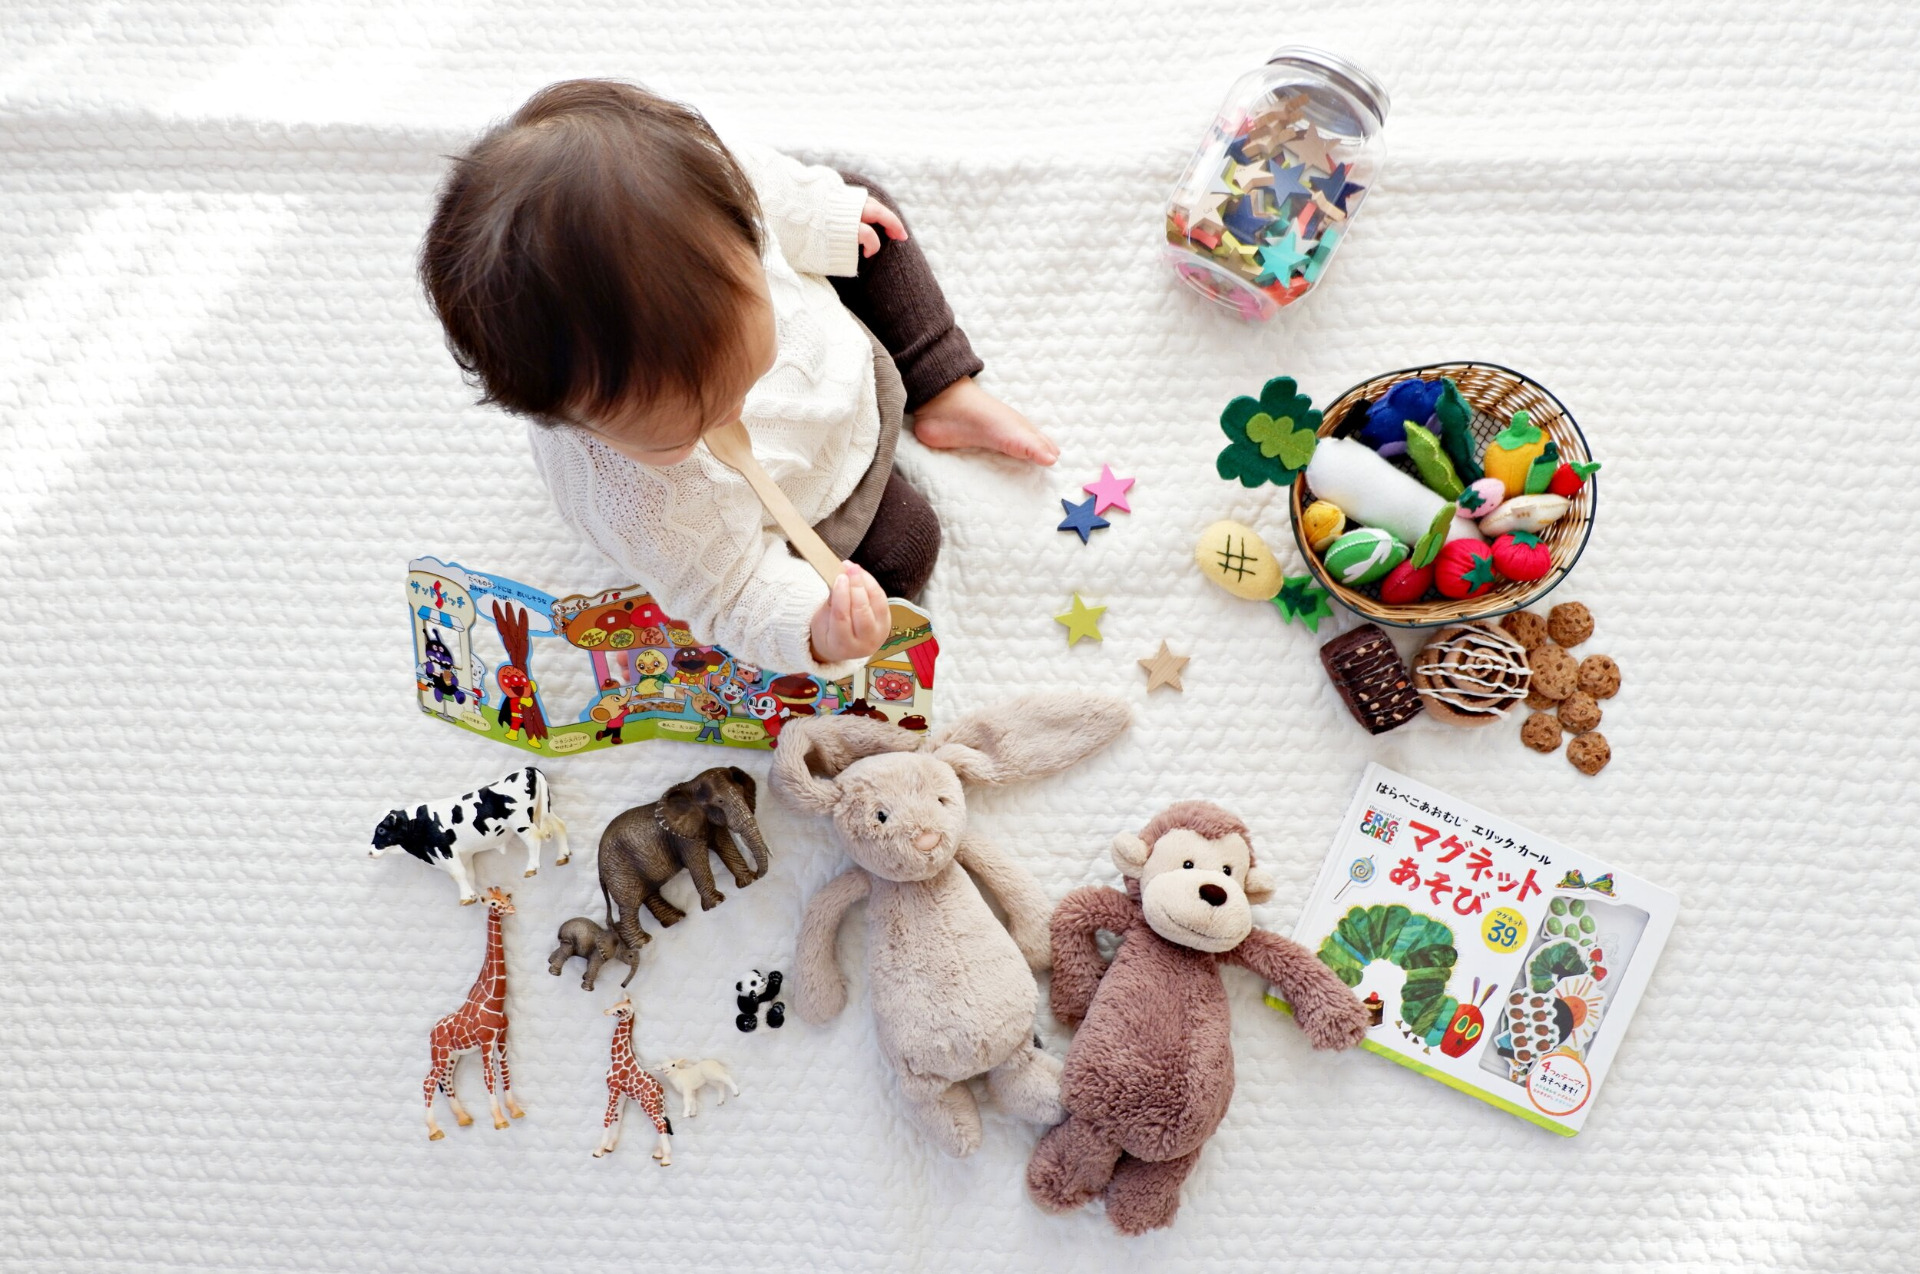 What Toys Should My Children Play With to Teach Them Language?